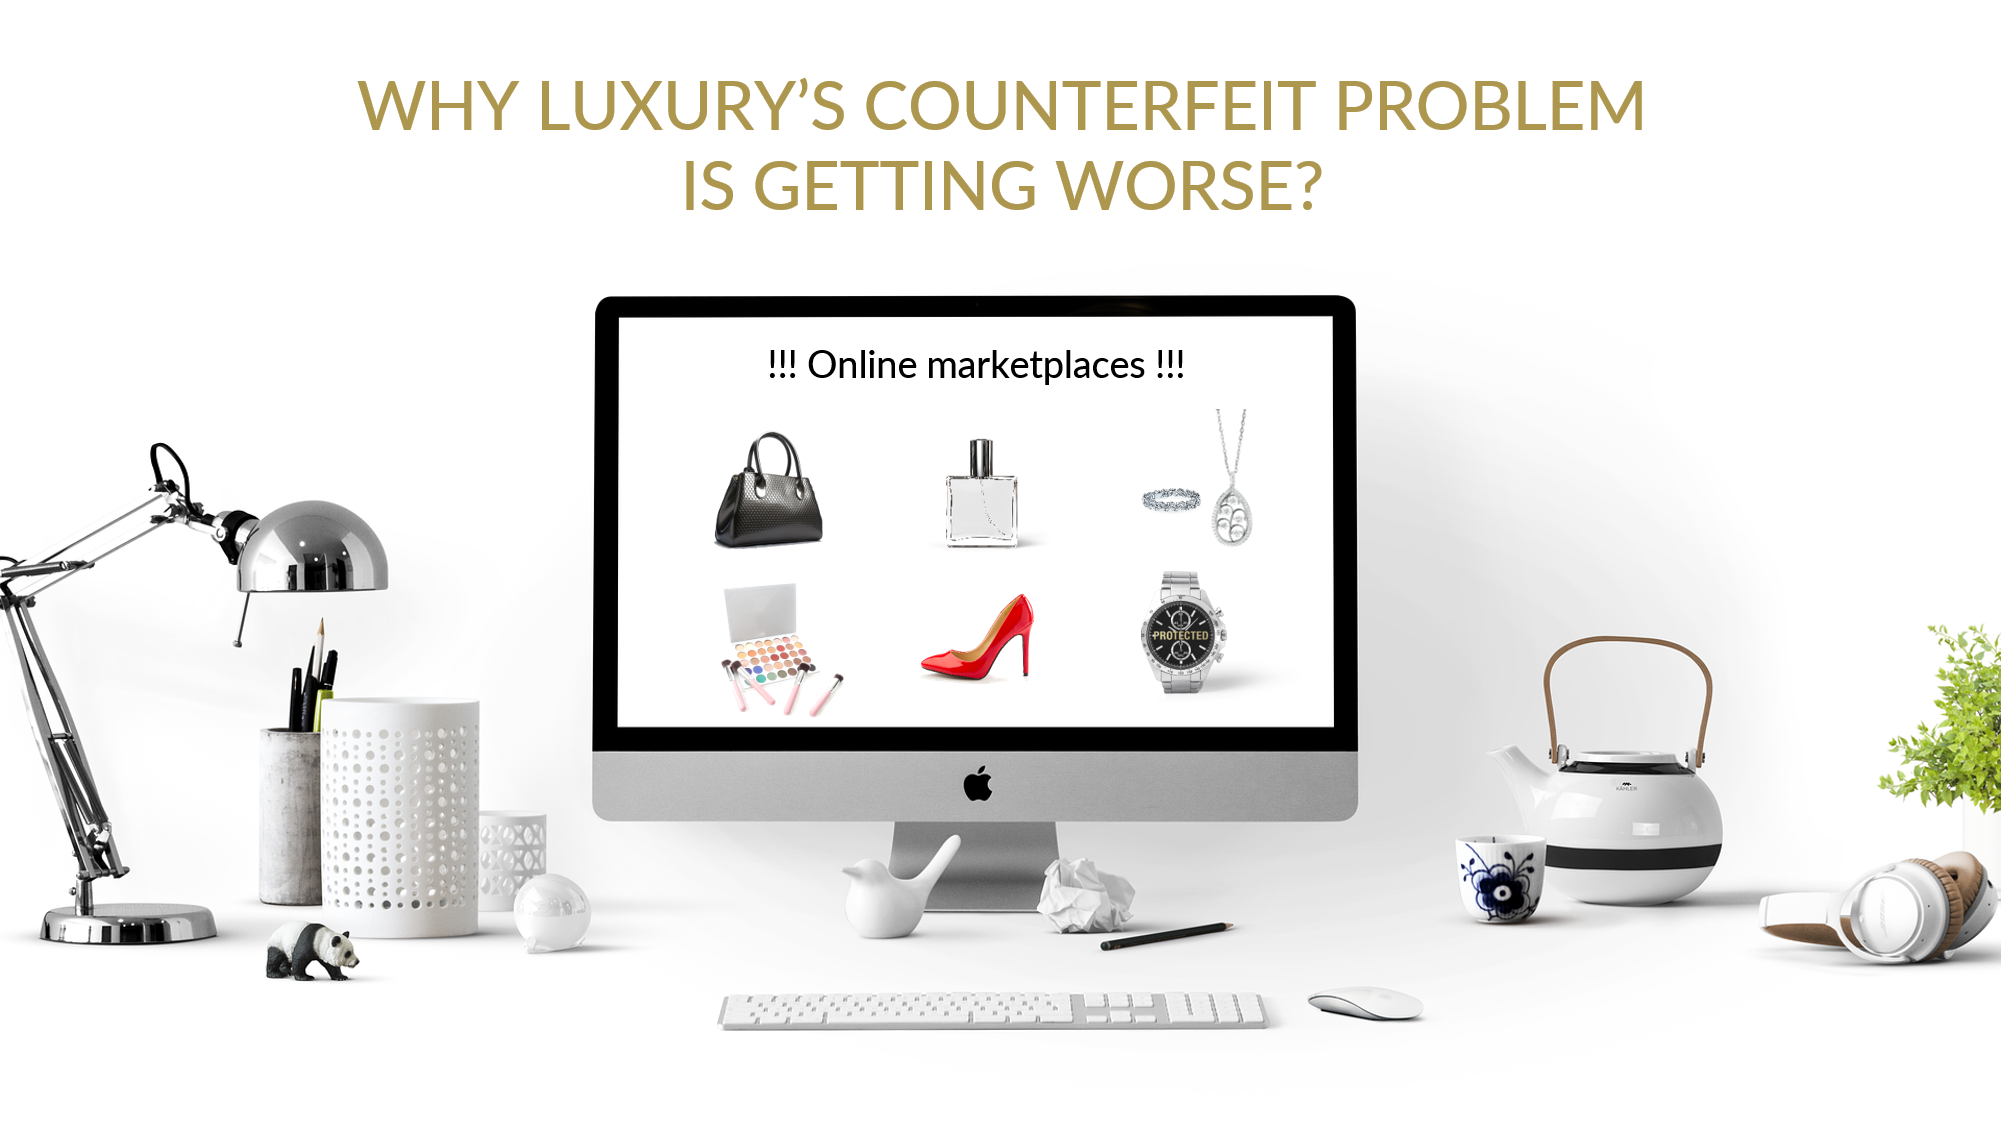 Why luxury’s counterfeit problem is getting worse